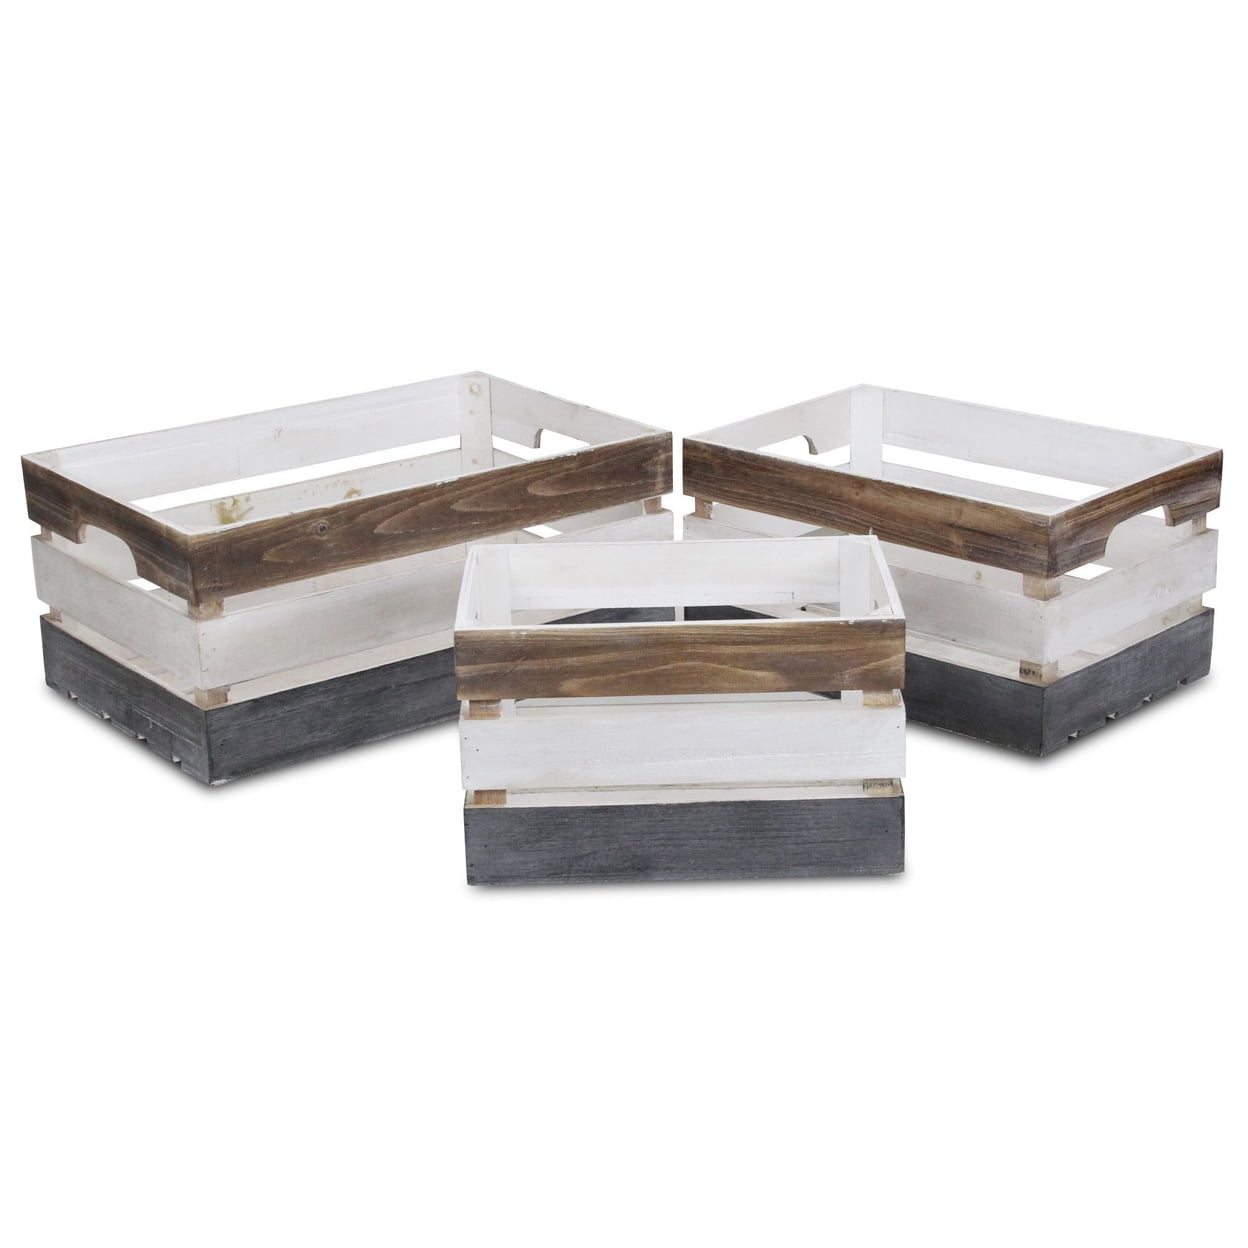 Picture of Cheungs FP-3245-3A Rectangular Wood Slat Crate, Tricolor - Set of 3